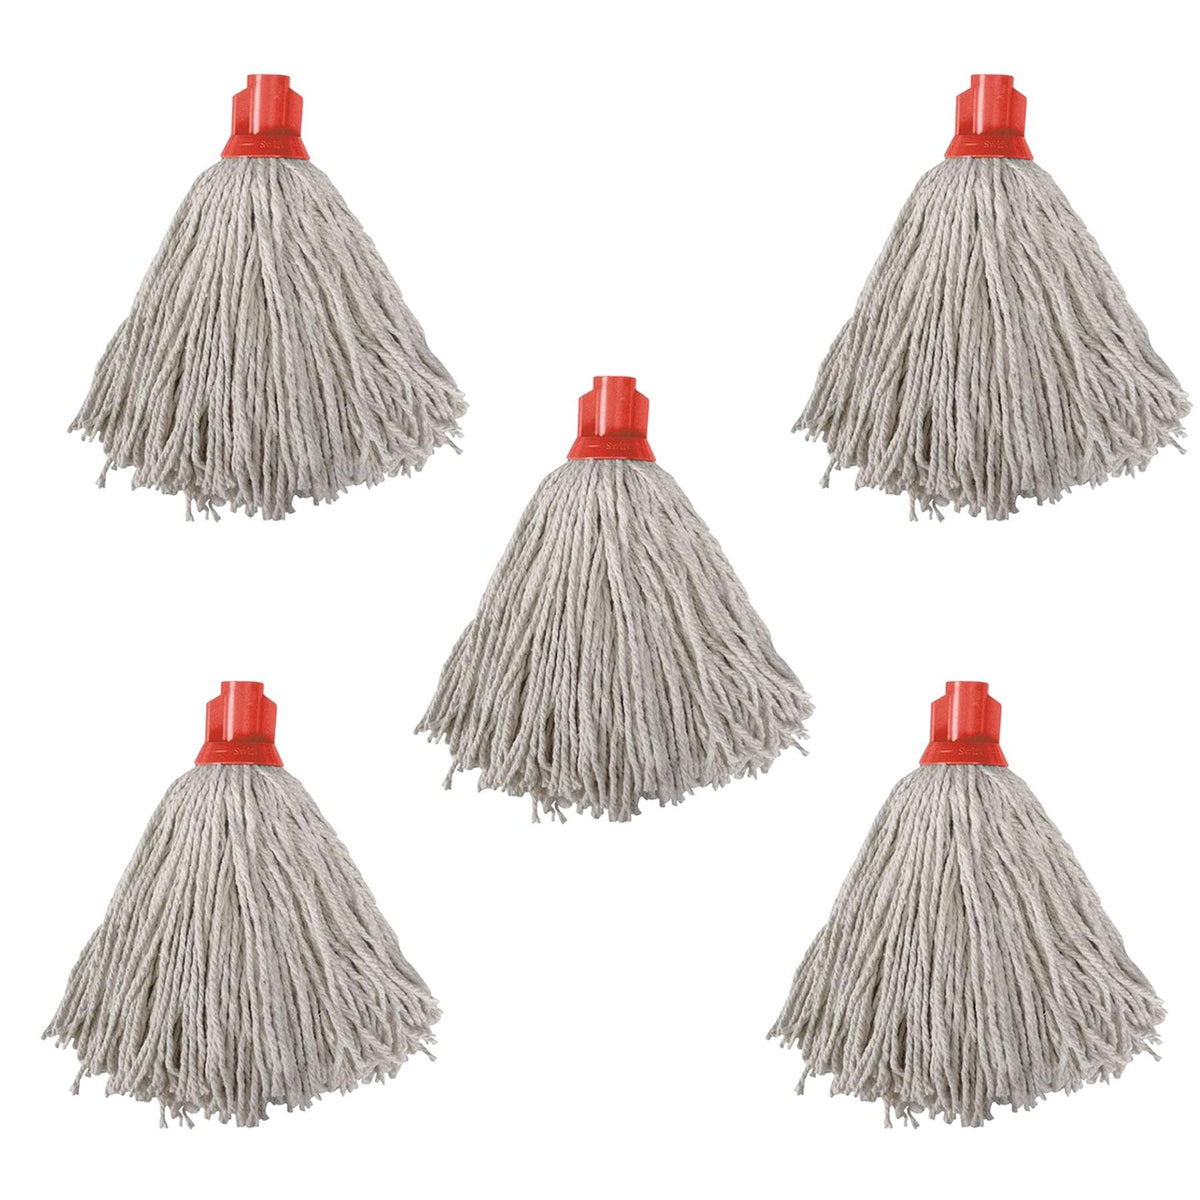 Swift PY Cotton Socket Mop, Pack of 5 Red